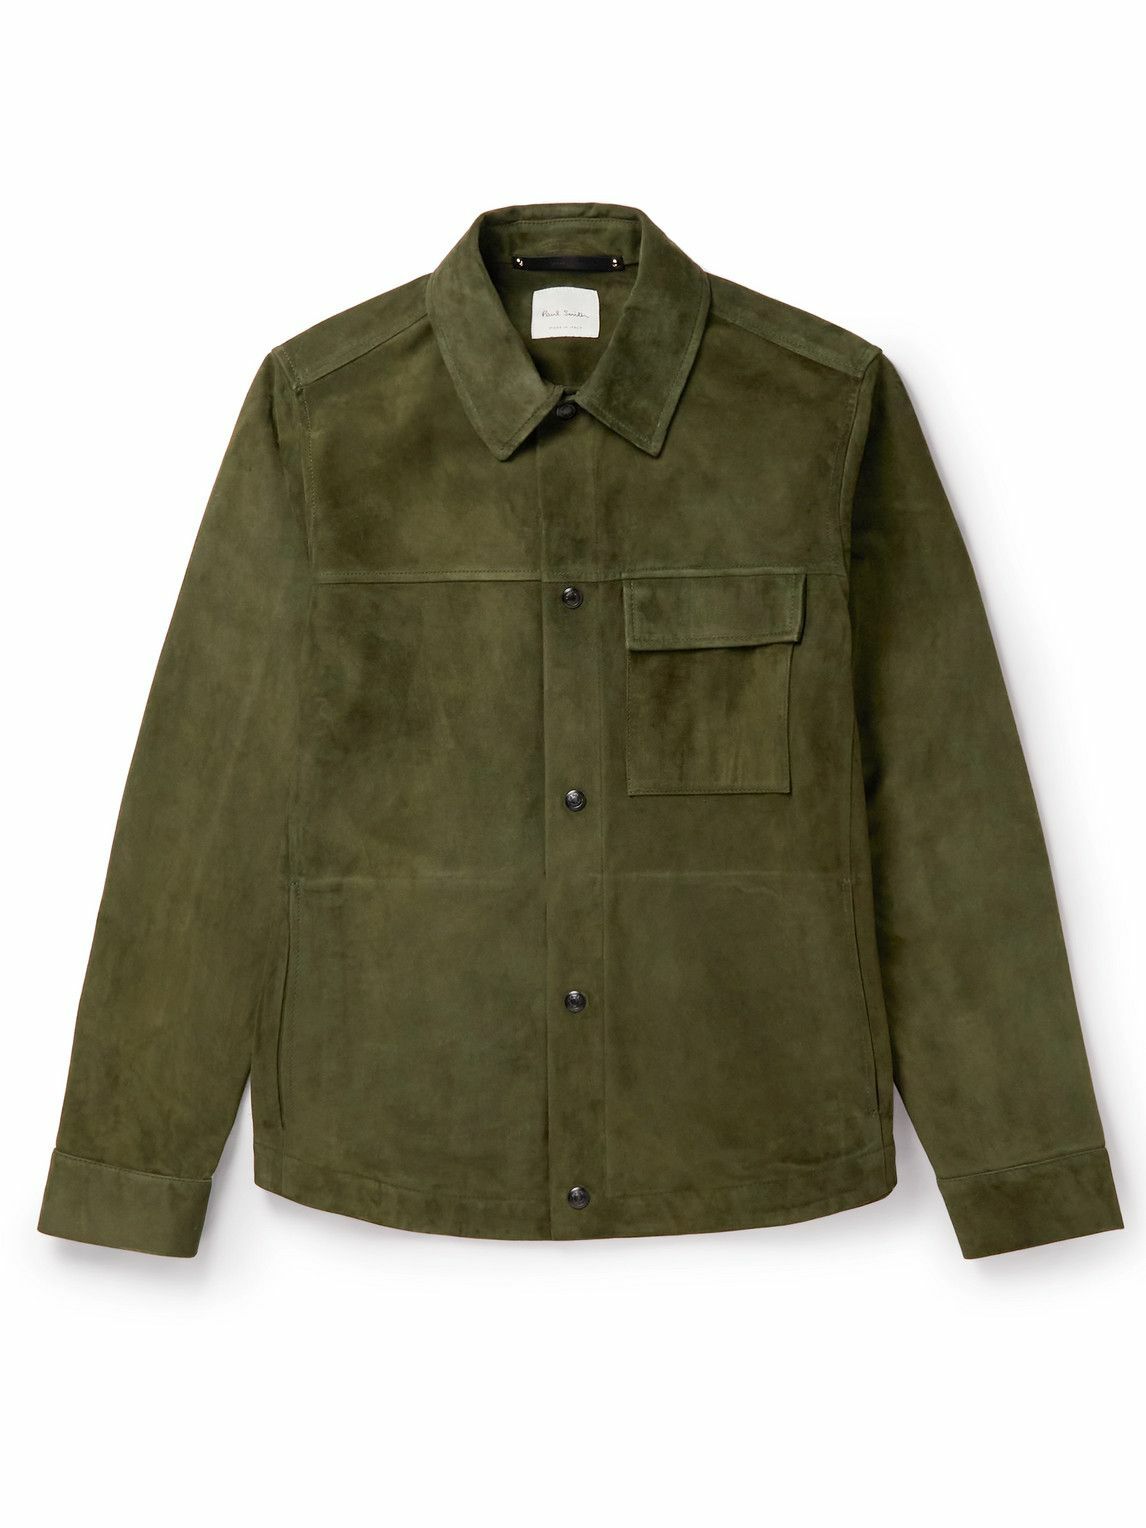 Paul Smith - Suede Shirt Jacket - Green Paul Smith